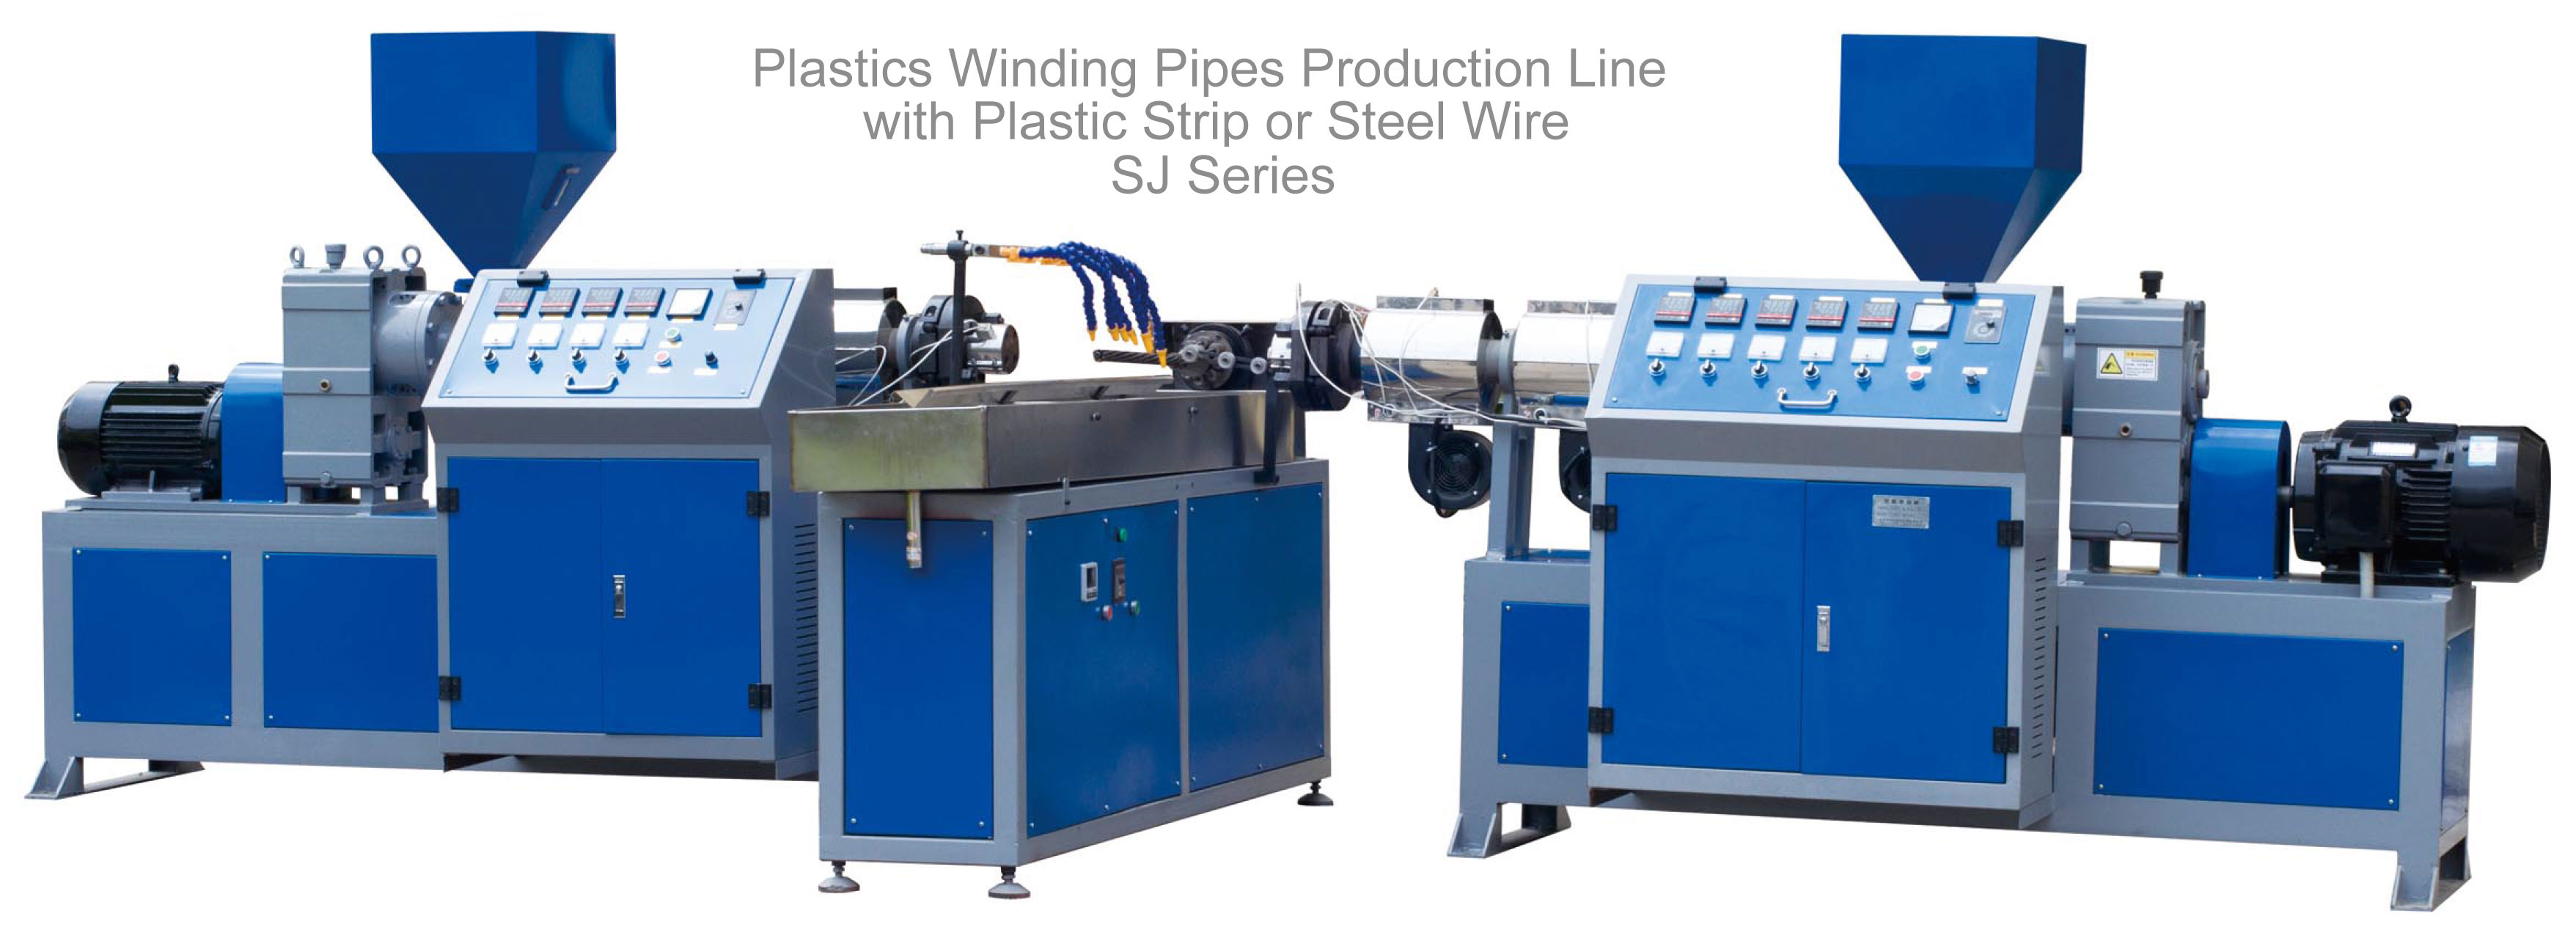 10 Plastics Winding Pipes Production Line with Plastic Strip or Steel Wire SJ Series